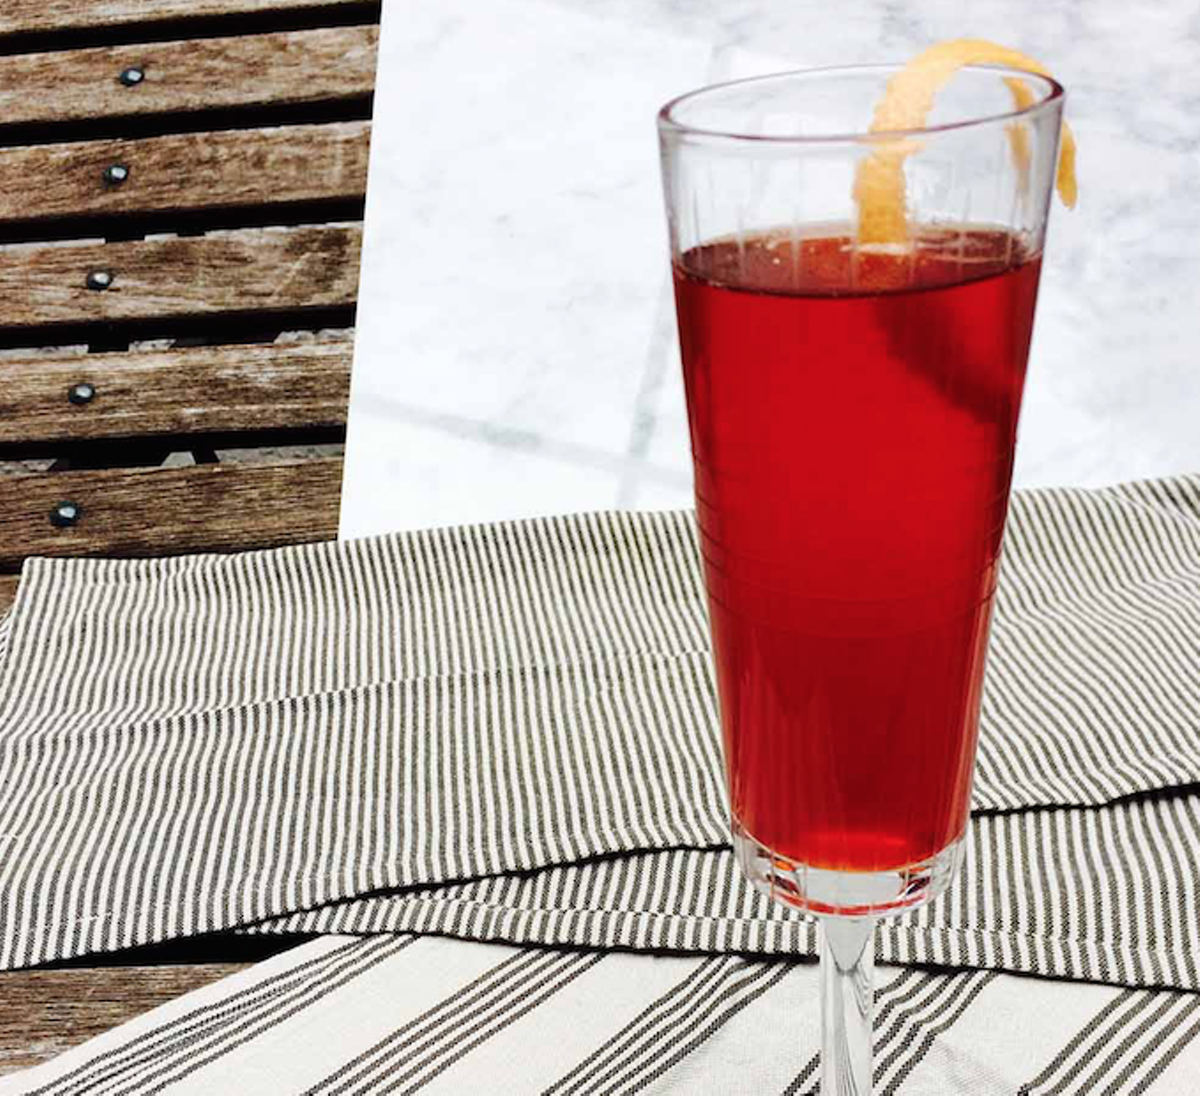 Summertime calls for adding sparkling rośe and ruby-red grapefruit to your negroni